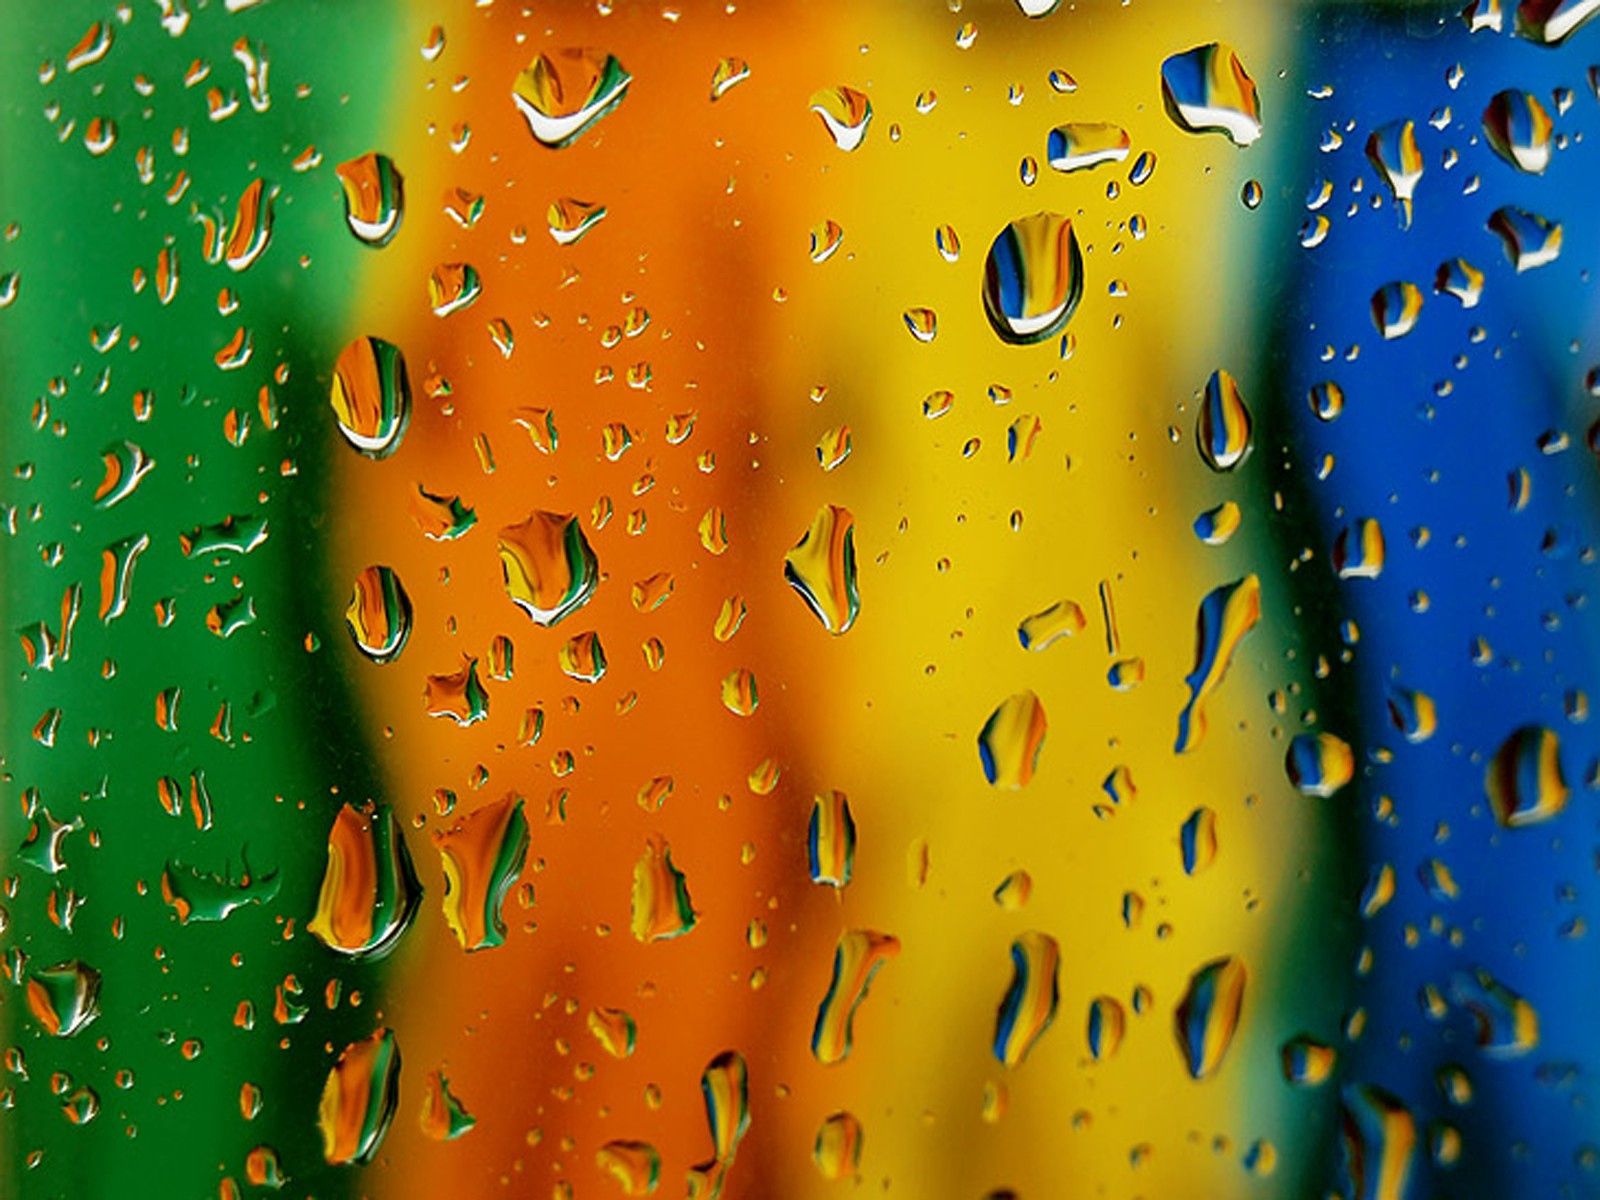 drops, multicolored, motley, texture, textures, surface UHD